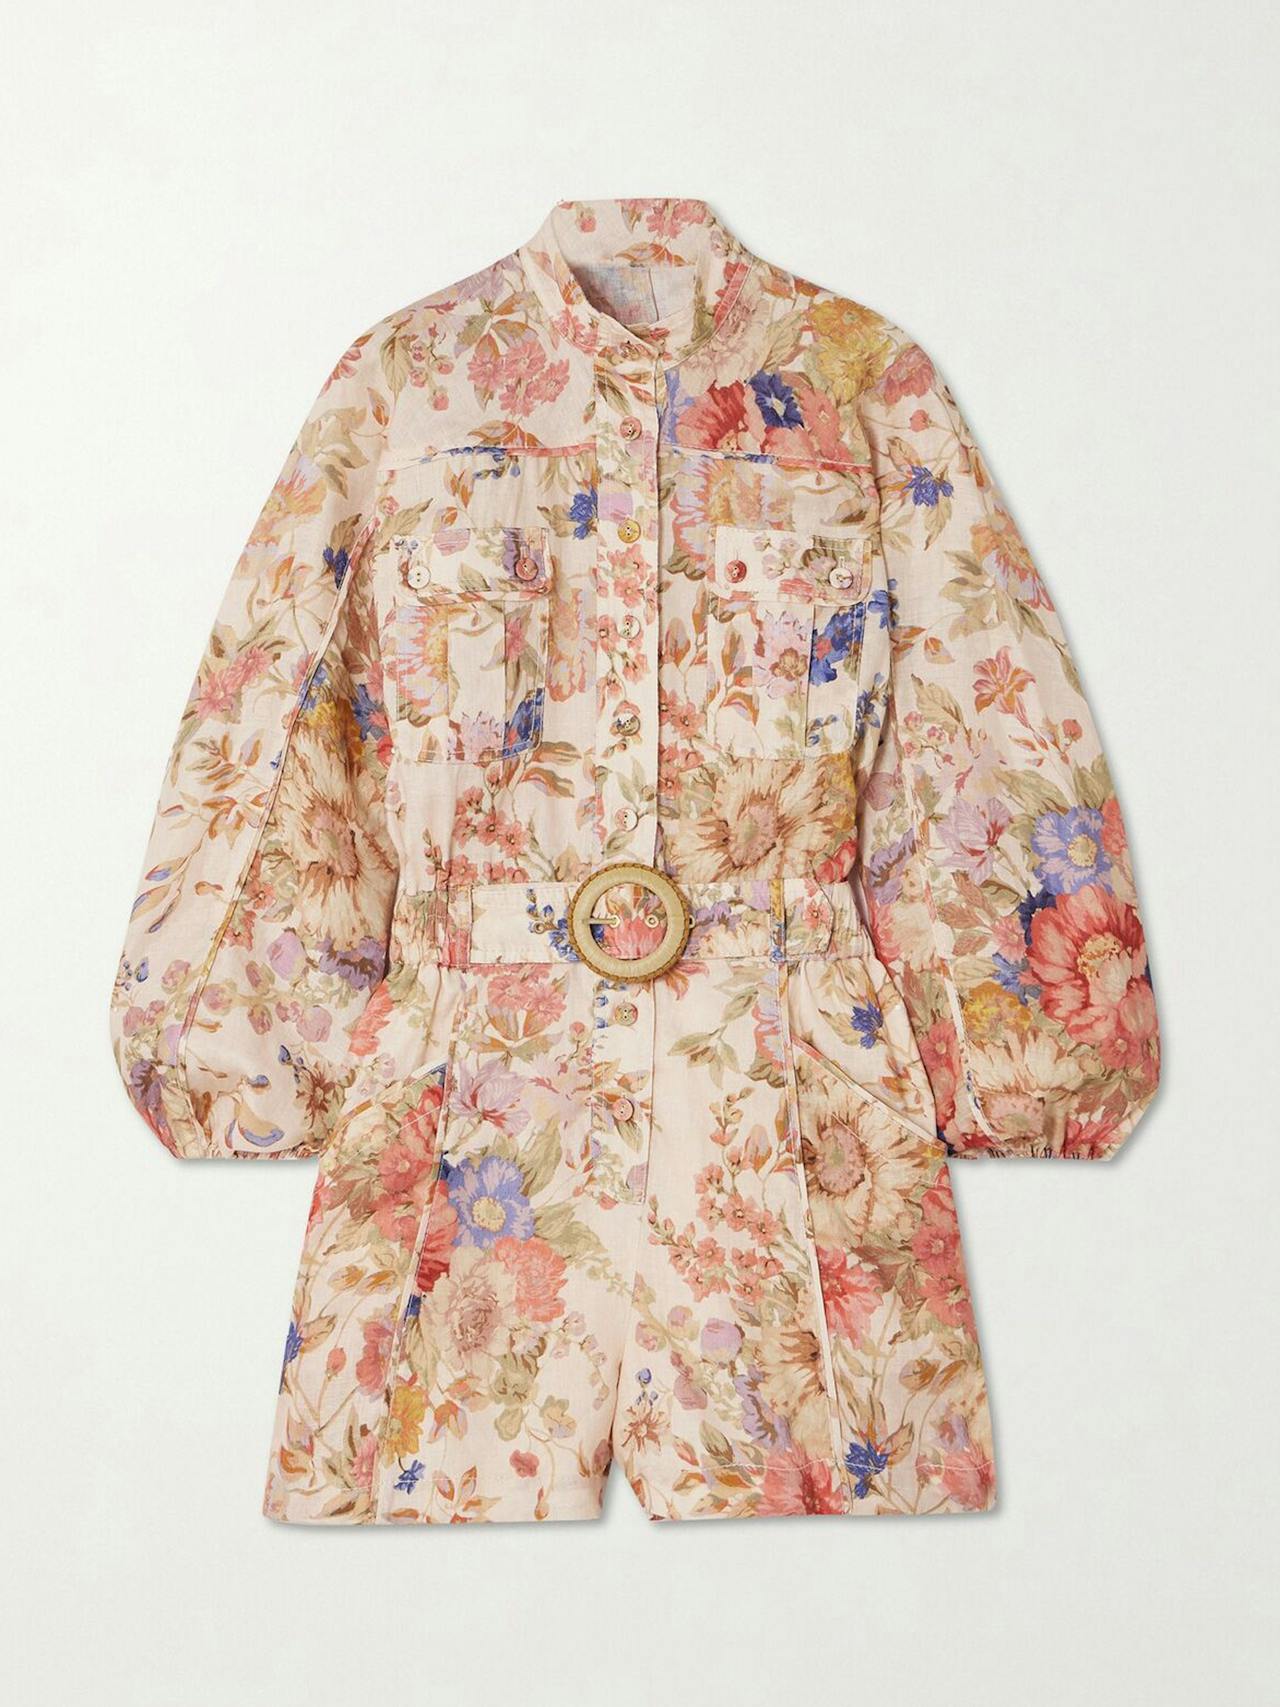 August belted floral-print linen playsuit